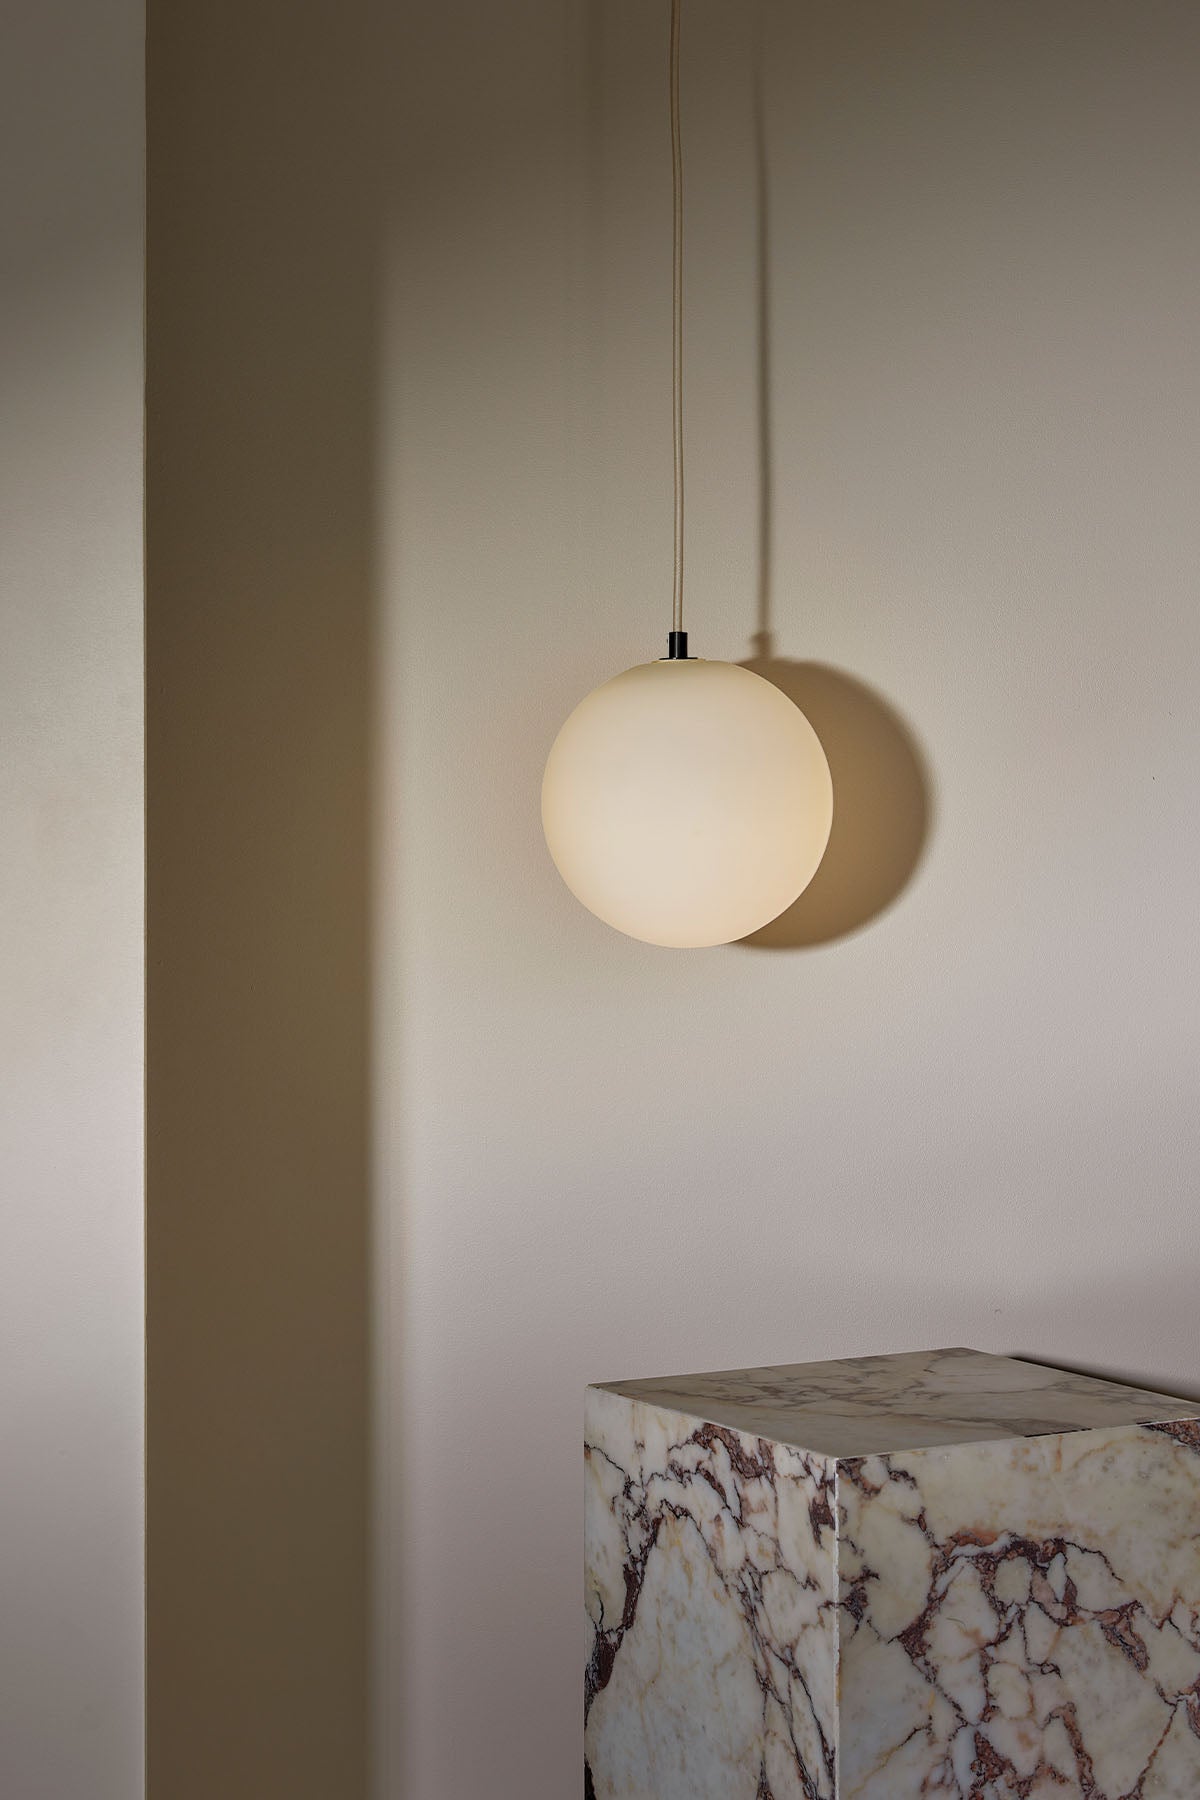 Orb Pendant, Large in Brushed Black and White Frosted. Image by Lawrence Furzey